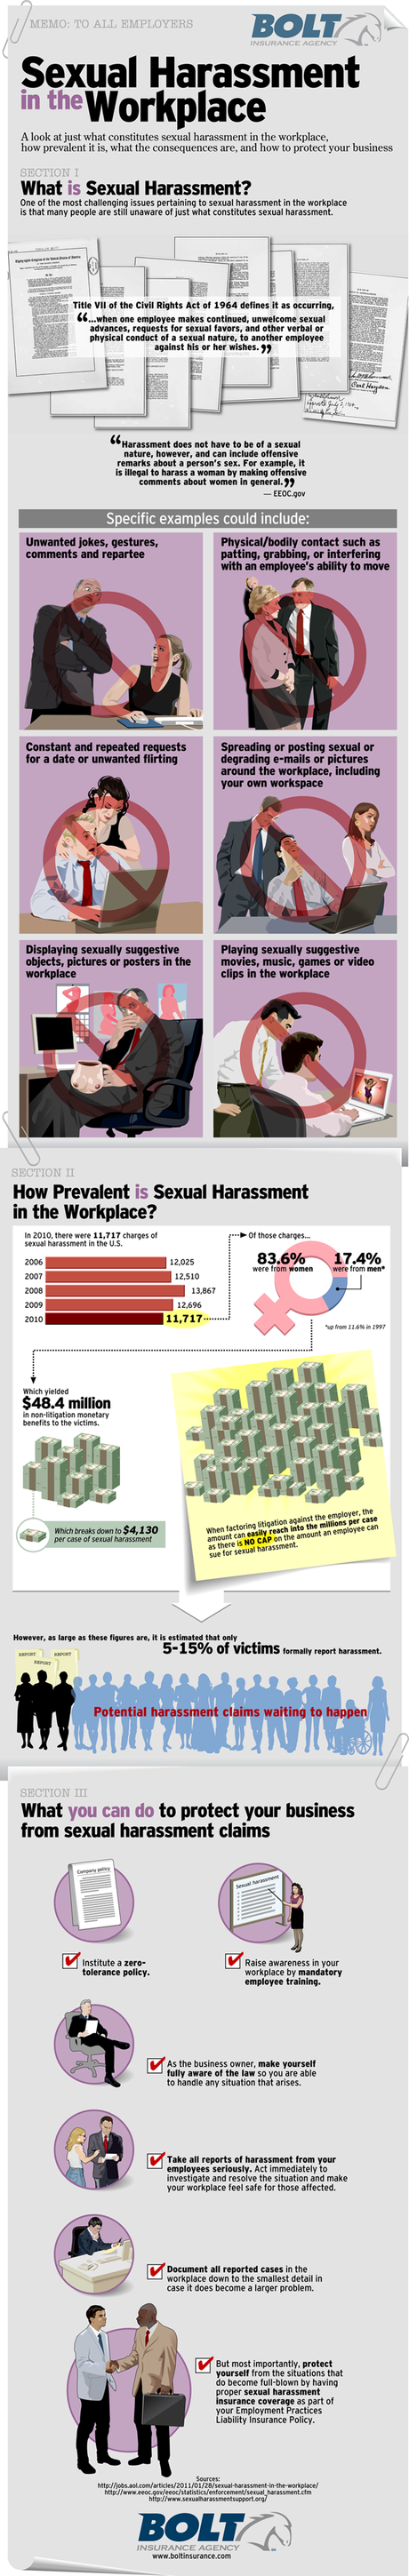 Sexual Harassment in the Workplace Infographic